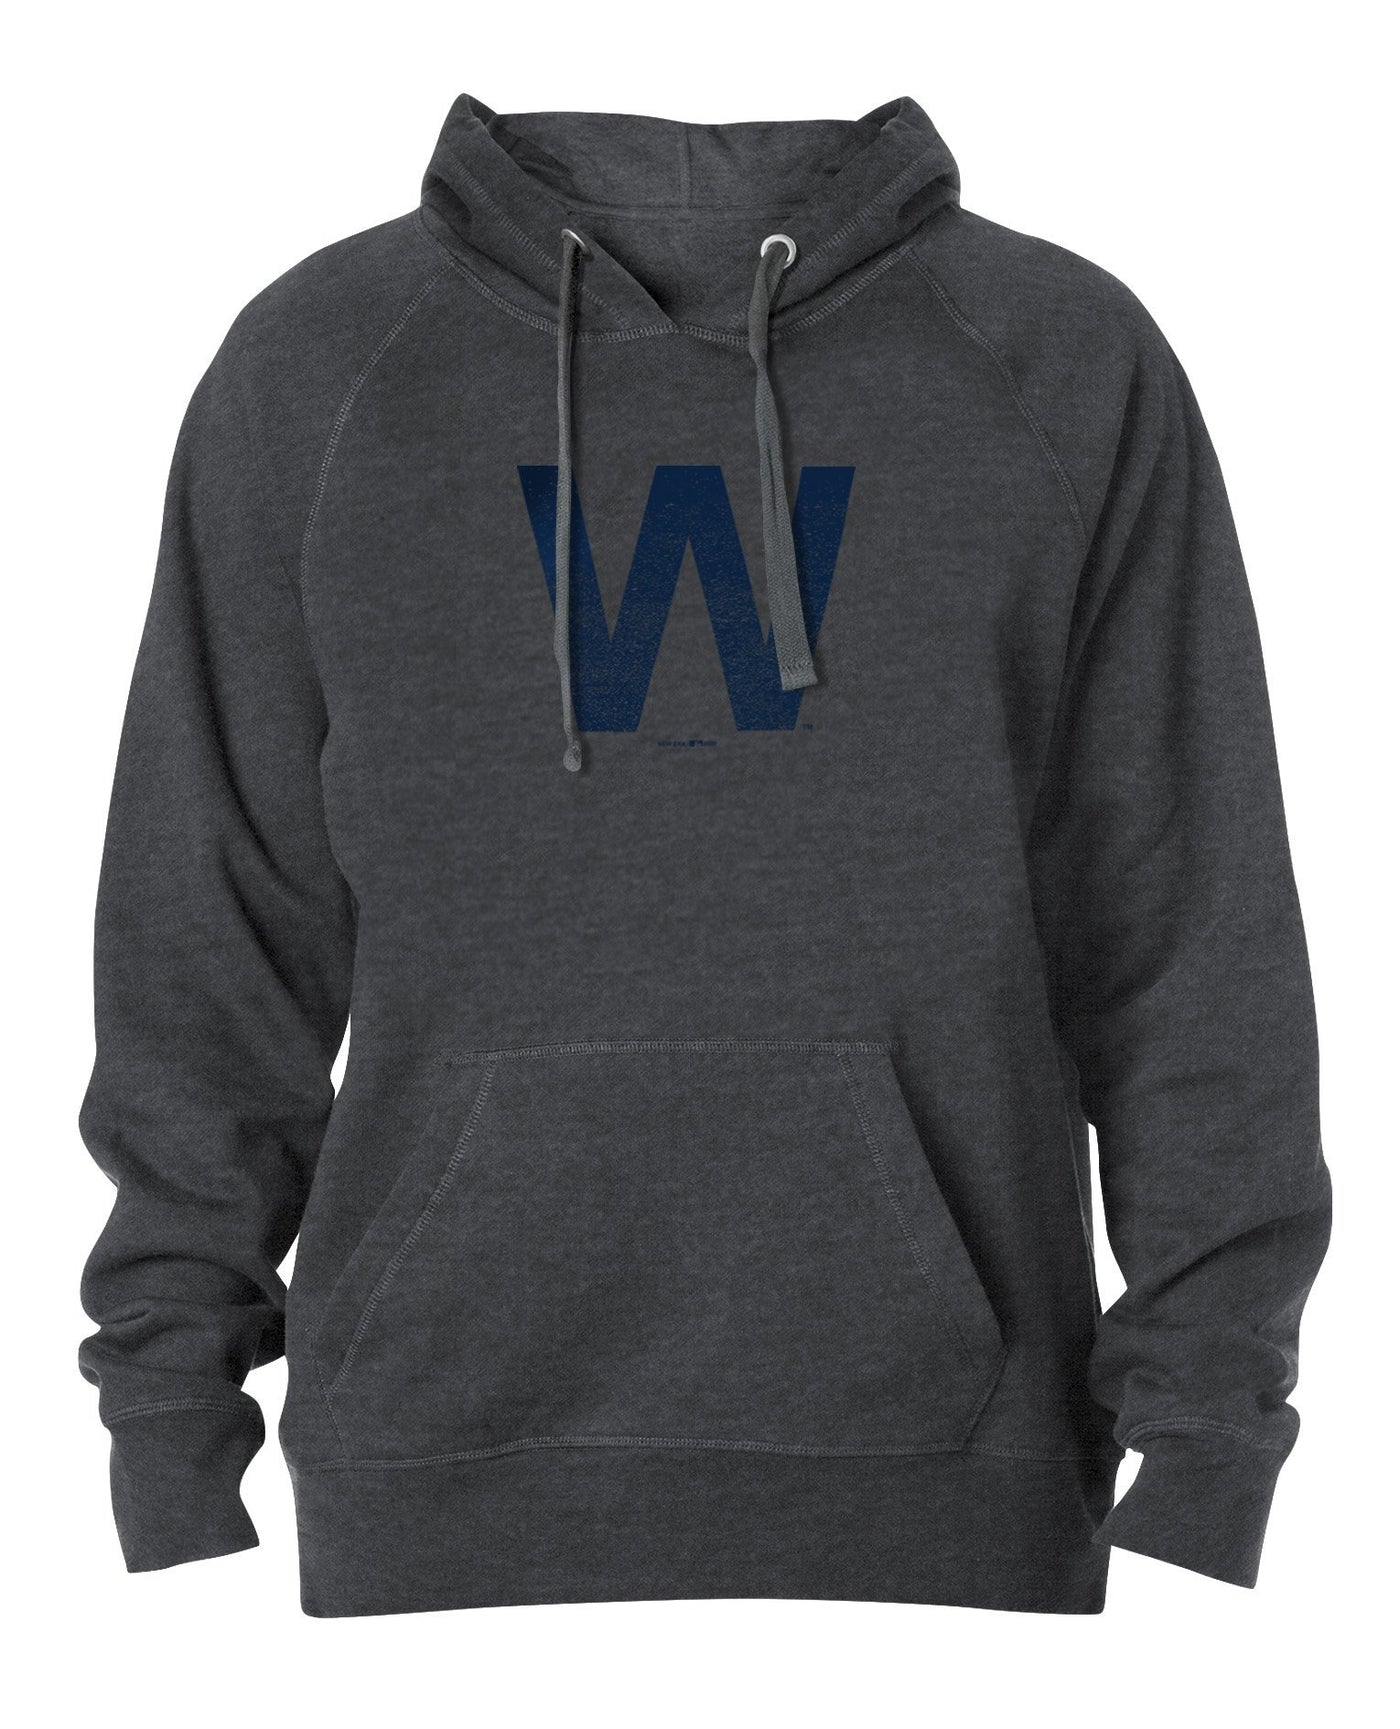 W CAPSULE COLLECTION CHARCOAL HERO HOODIE - Ivy Shop